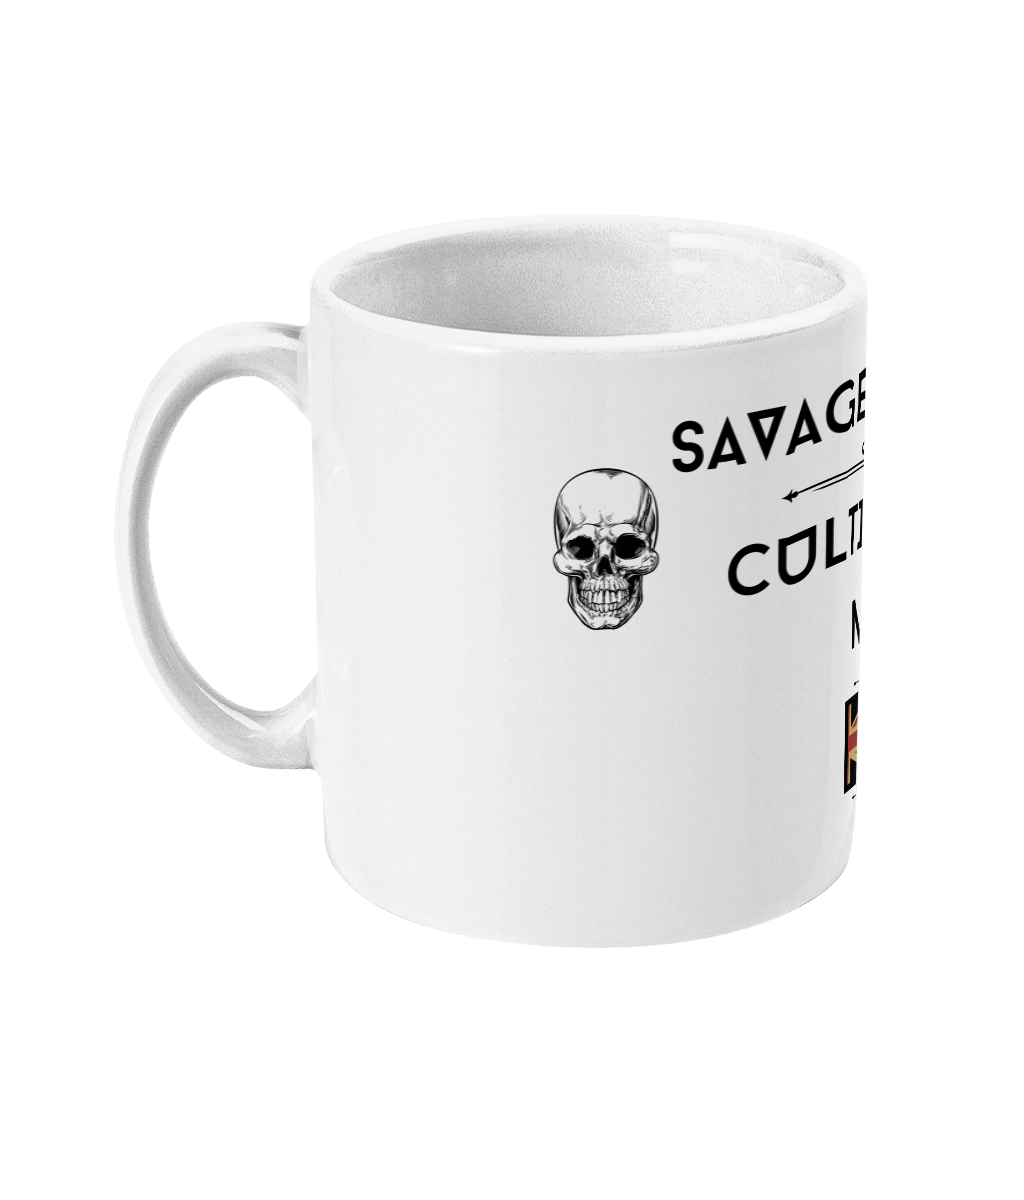 Savage the Body, cultivate the mind mug - Limitless Equipment